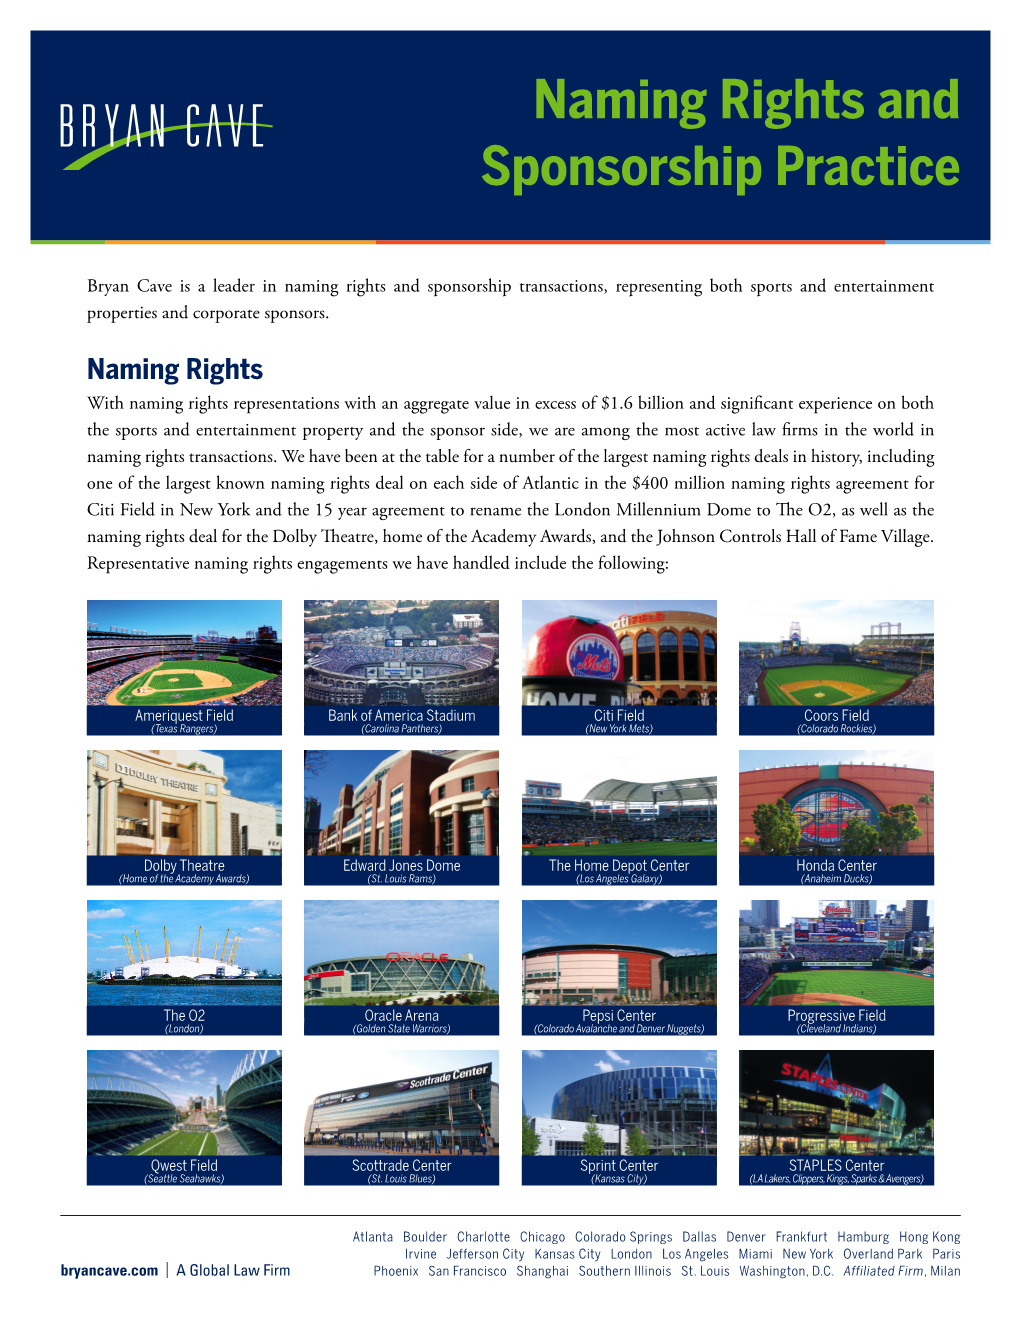 Naming Rights and Sponsorship Practice